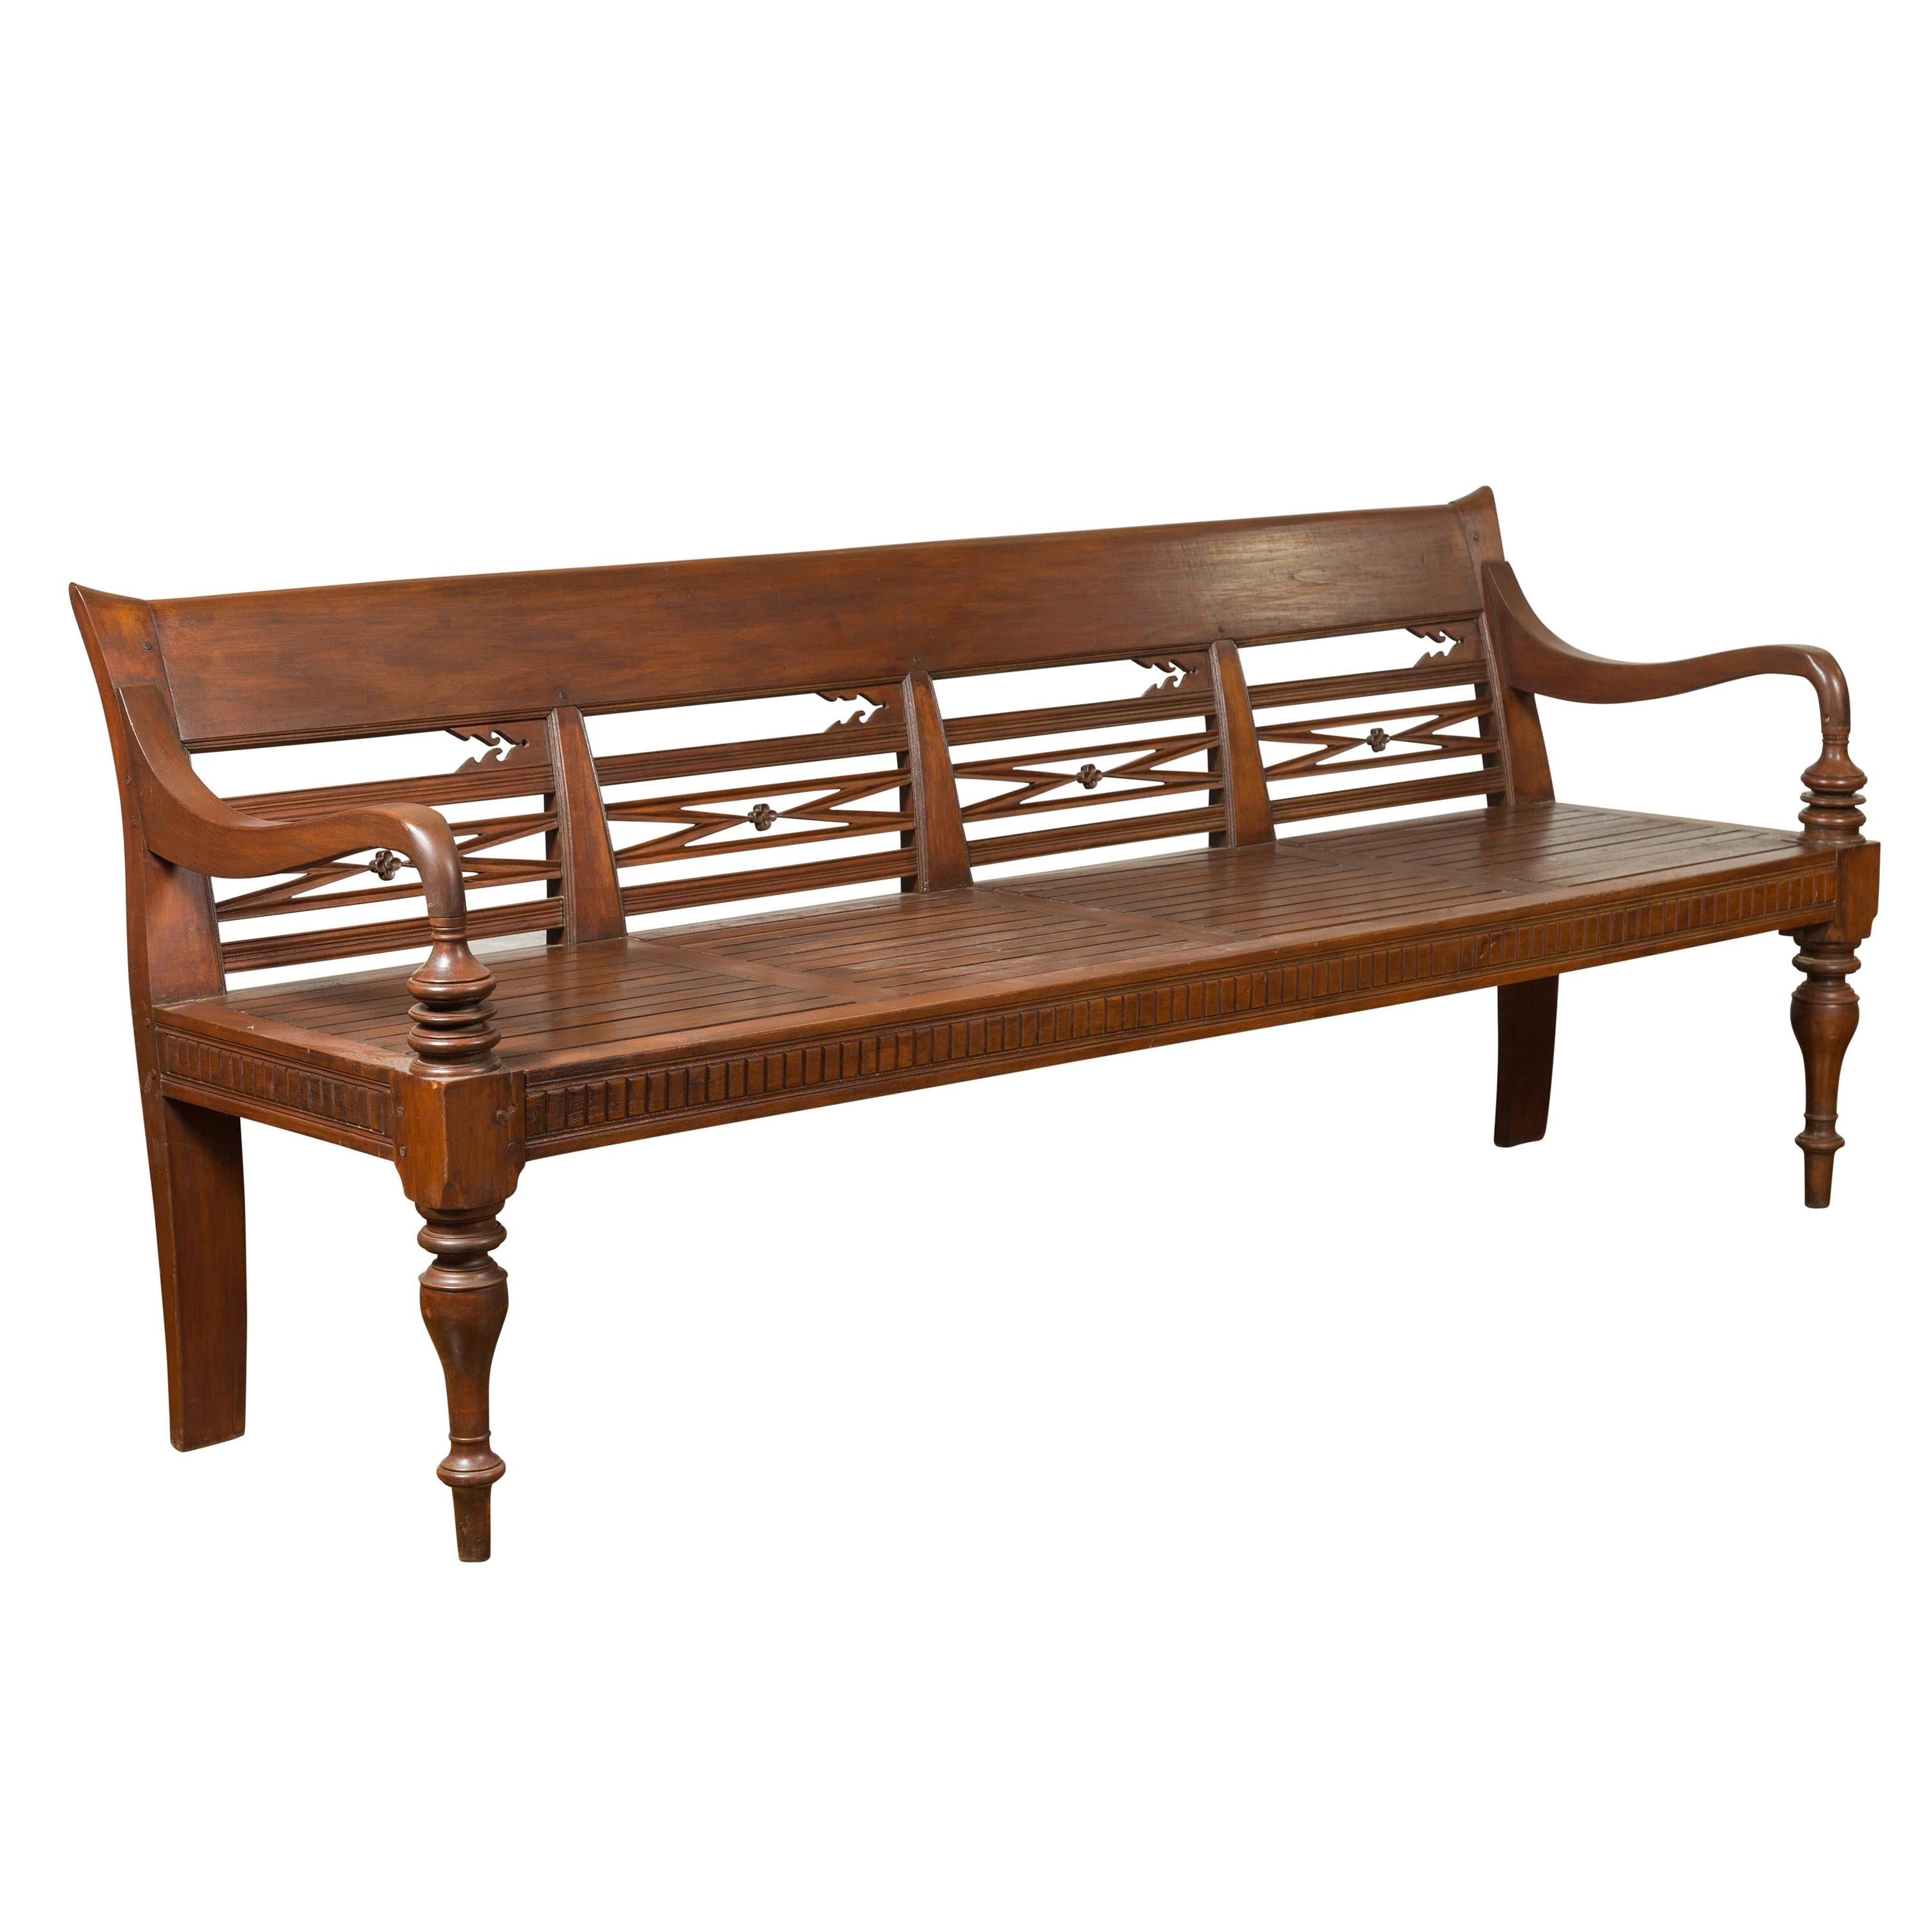 Dutch Colonial Late 19th Century Bench with Pierced Back and Scrolling Arms